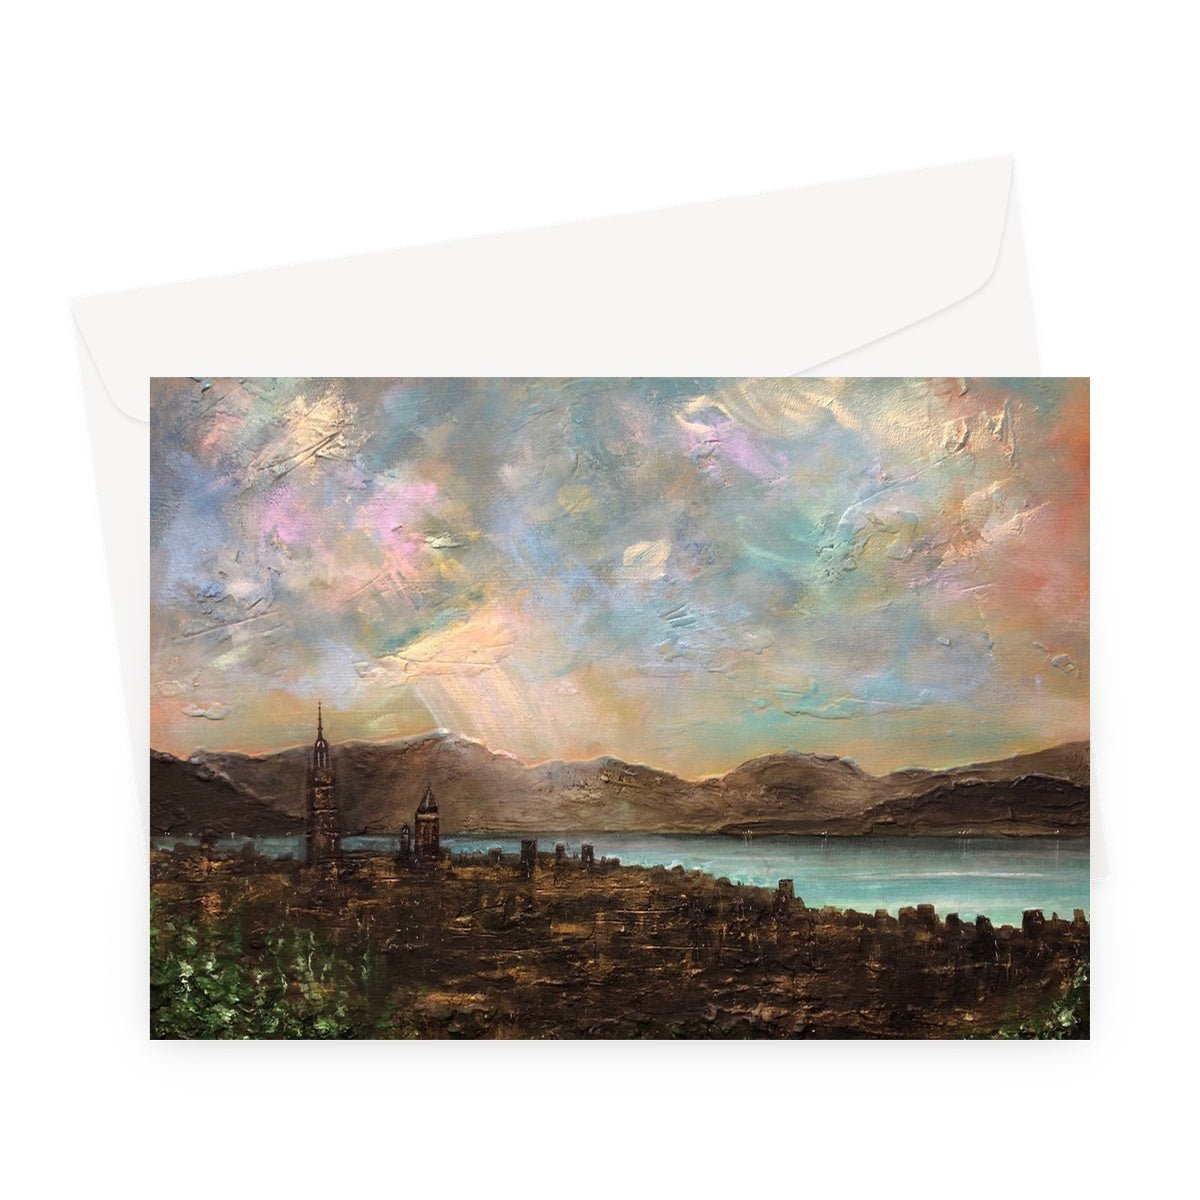 Angels Fingers Over Greenock Art Gifts Greeting Card-Greetings Cards-River Clyde Art Gallery-A5 Landscape-10 Cards-Paintings, Prints, Homeware, Art Gifts From Scotland By Scottish Artist Kevin Hunter